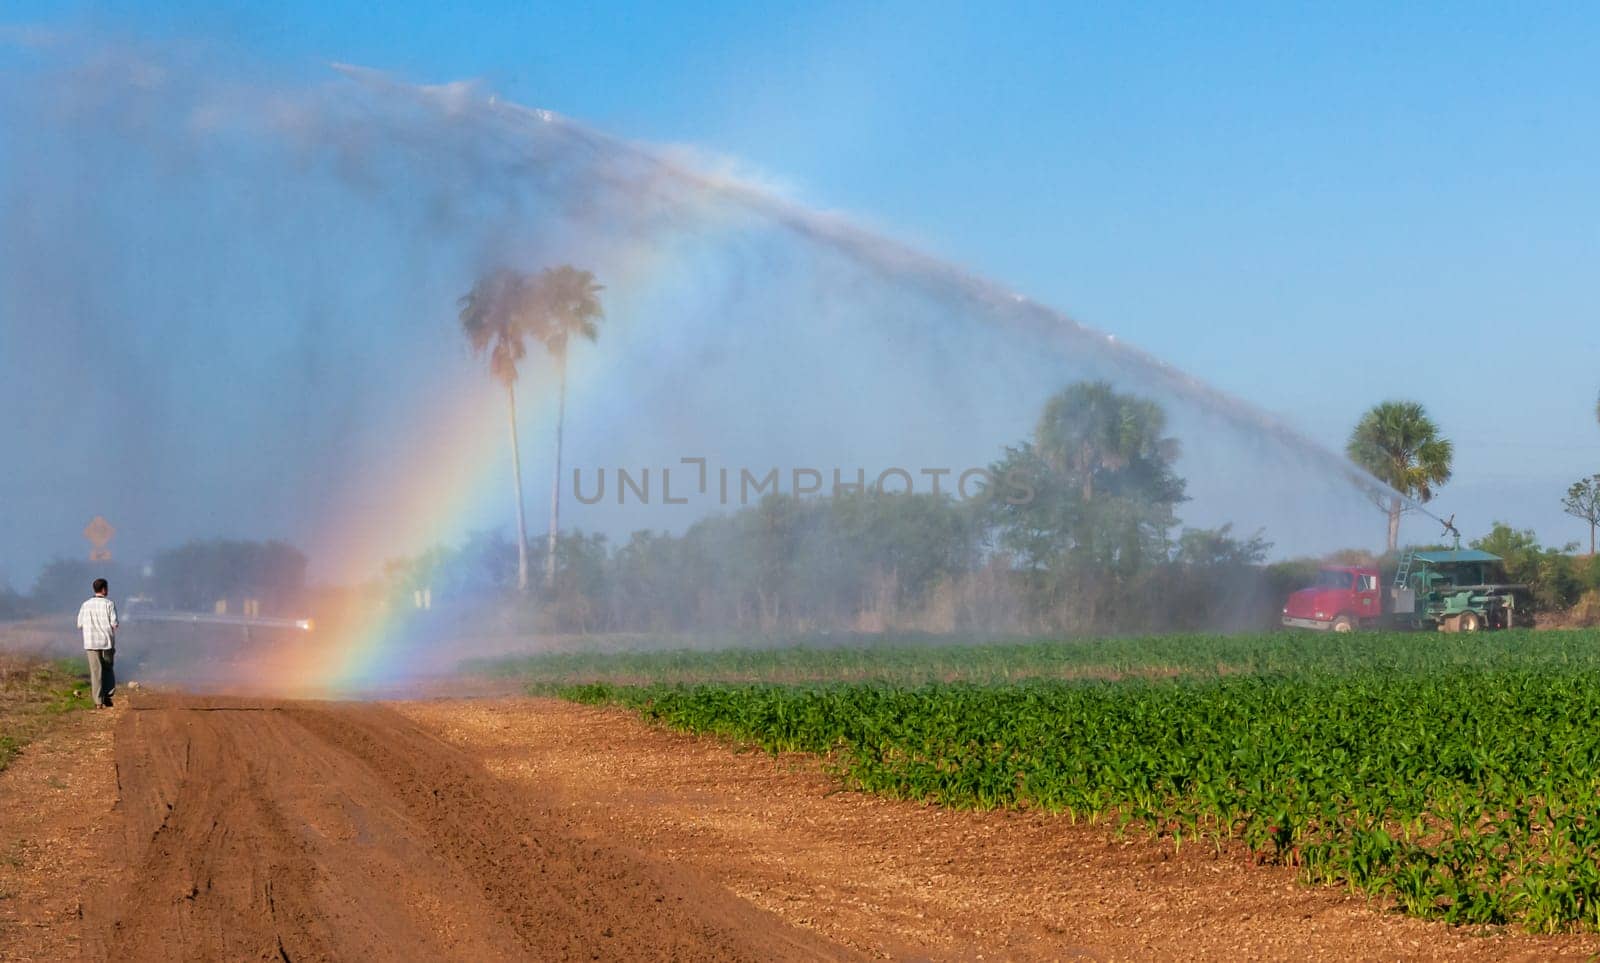 USA, FLORIDA - NOVEMBER 30, 2011: a rainbow in the sky from a fire engine spraying a field, Florida